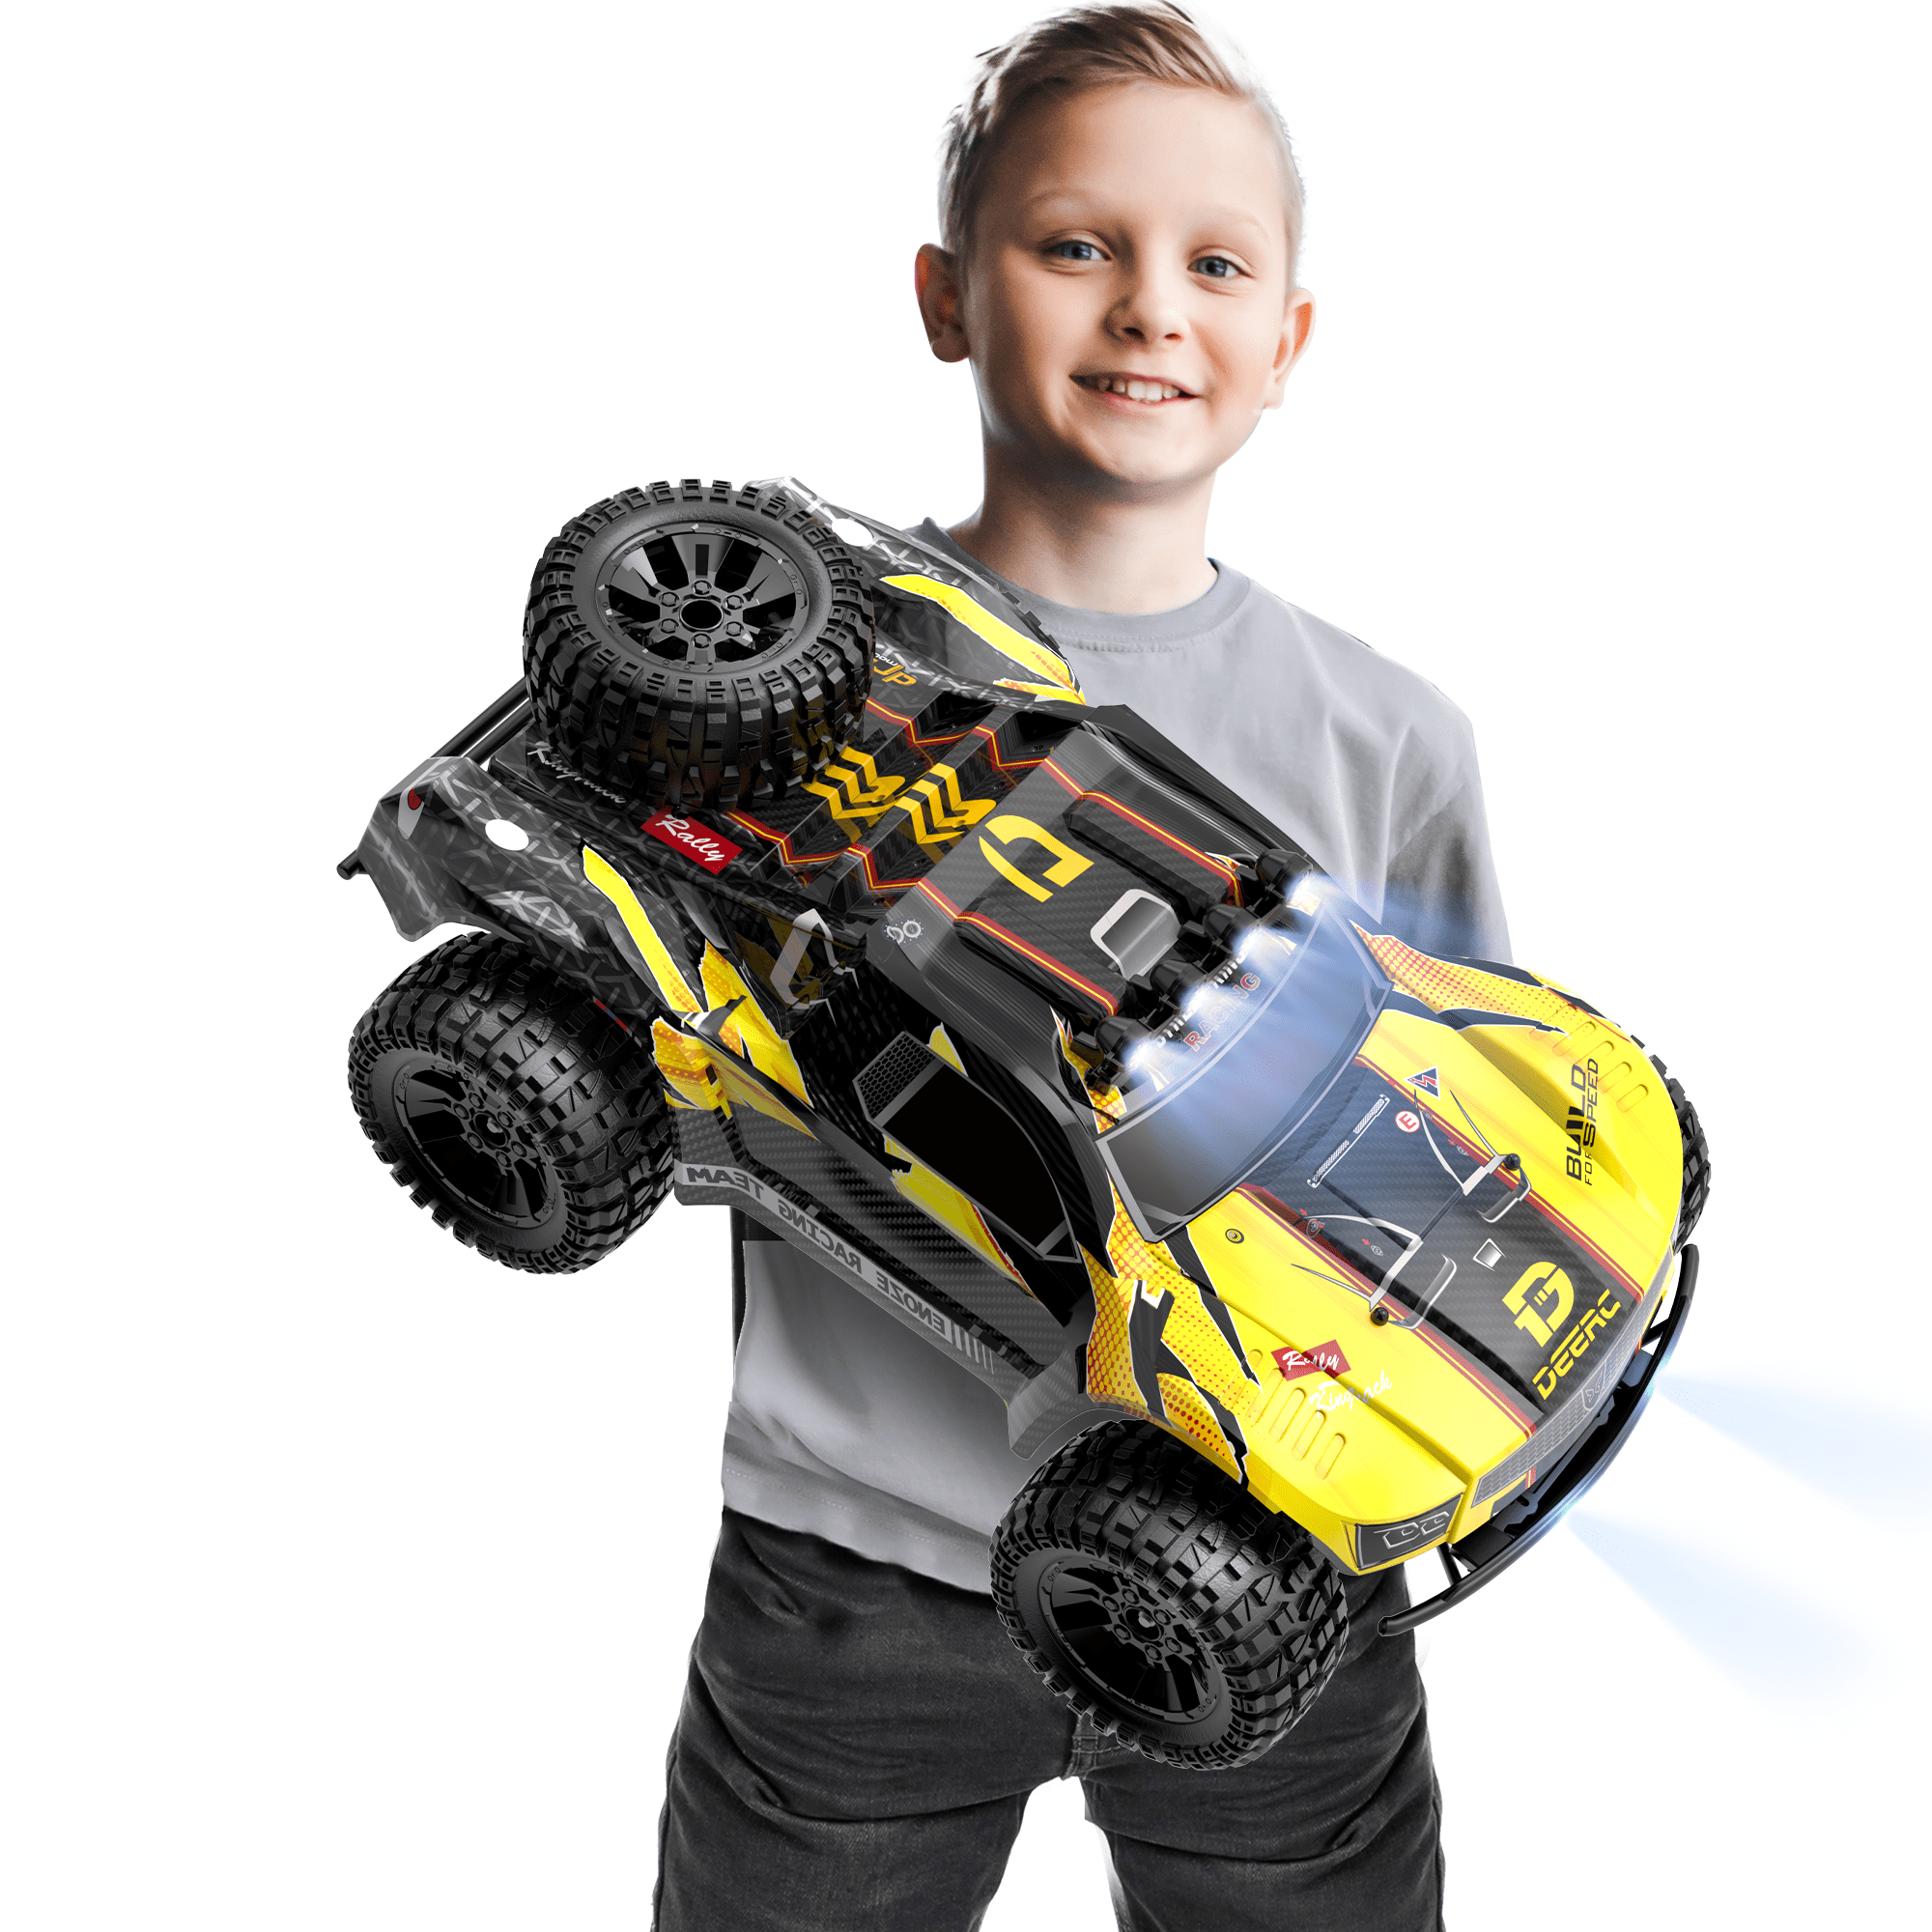 Deerc 1:10 Large Scale Rc Car 4Wd 50Km/H High Speed Remote Control Car With  Lights For Kids Adults,Off-Road Monster Crawler Truck Toy For Boys With 2  Batteries - Walmart.Com